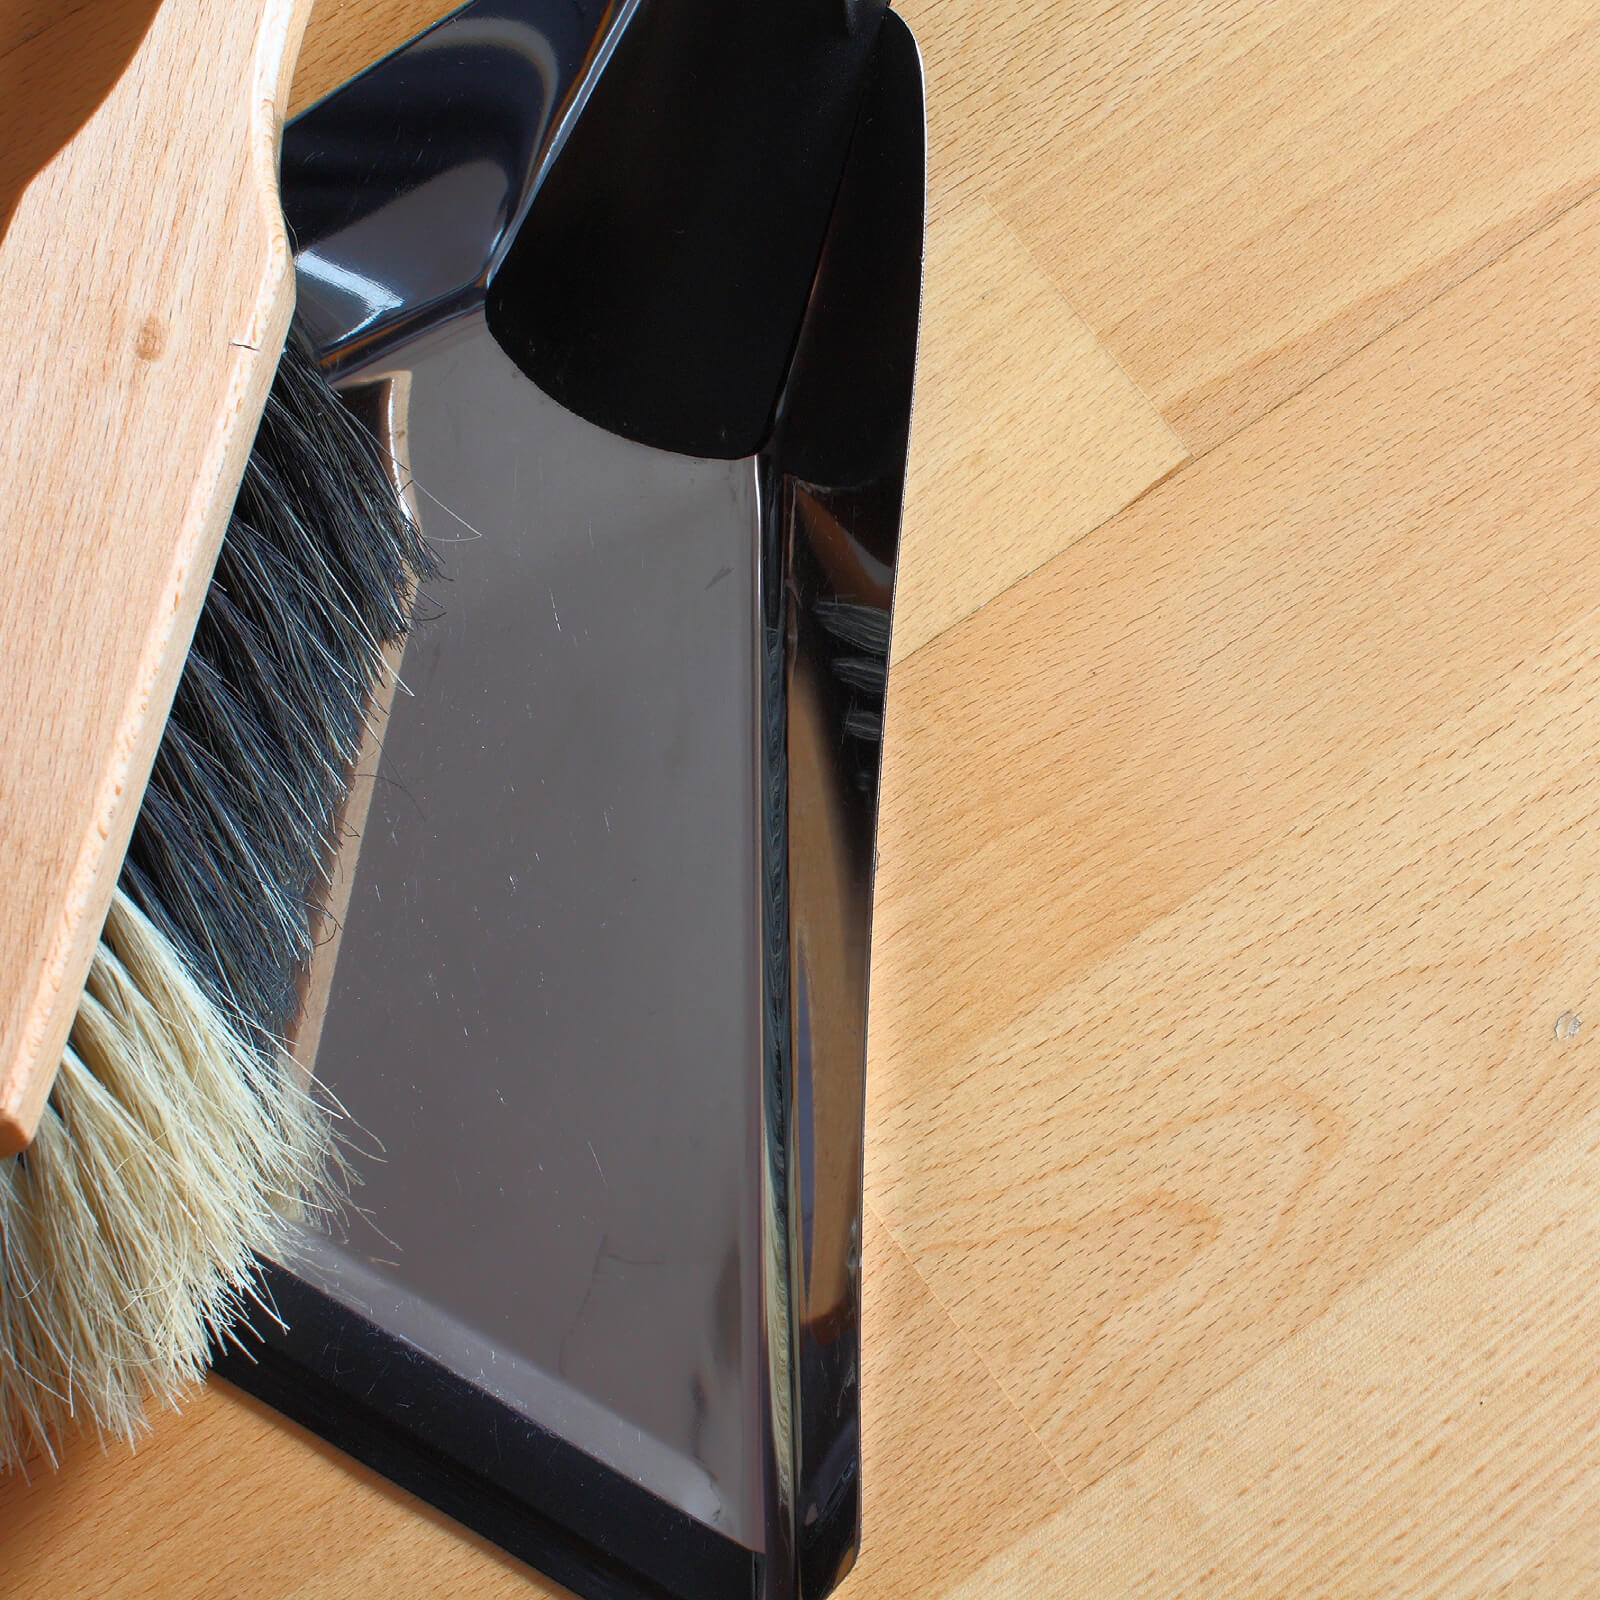 Hardwood cleaning | The Flooring Center